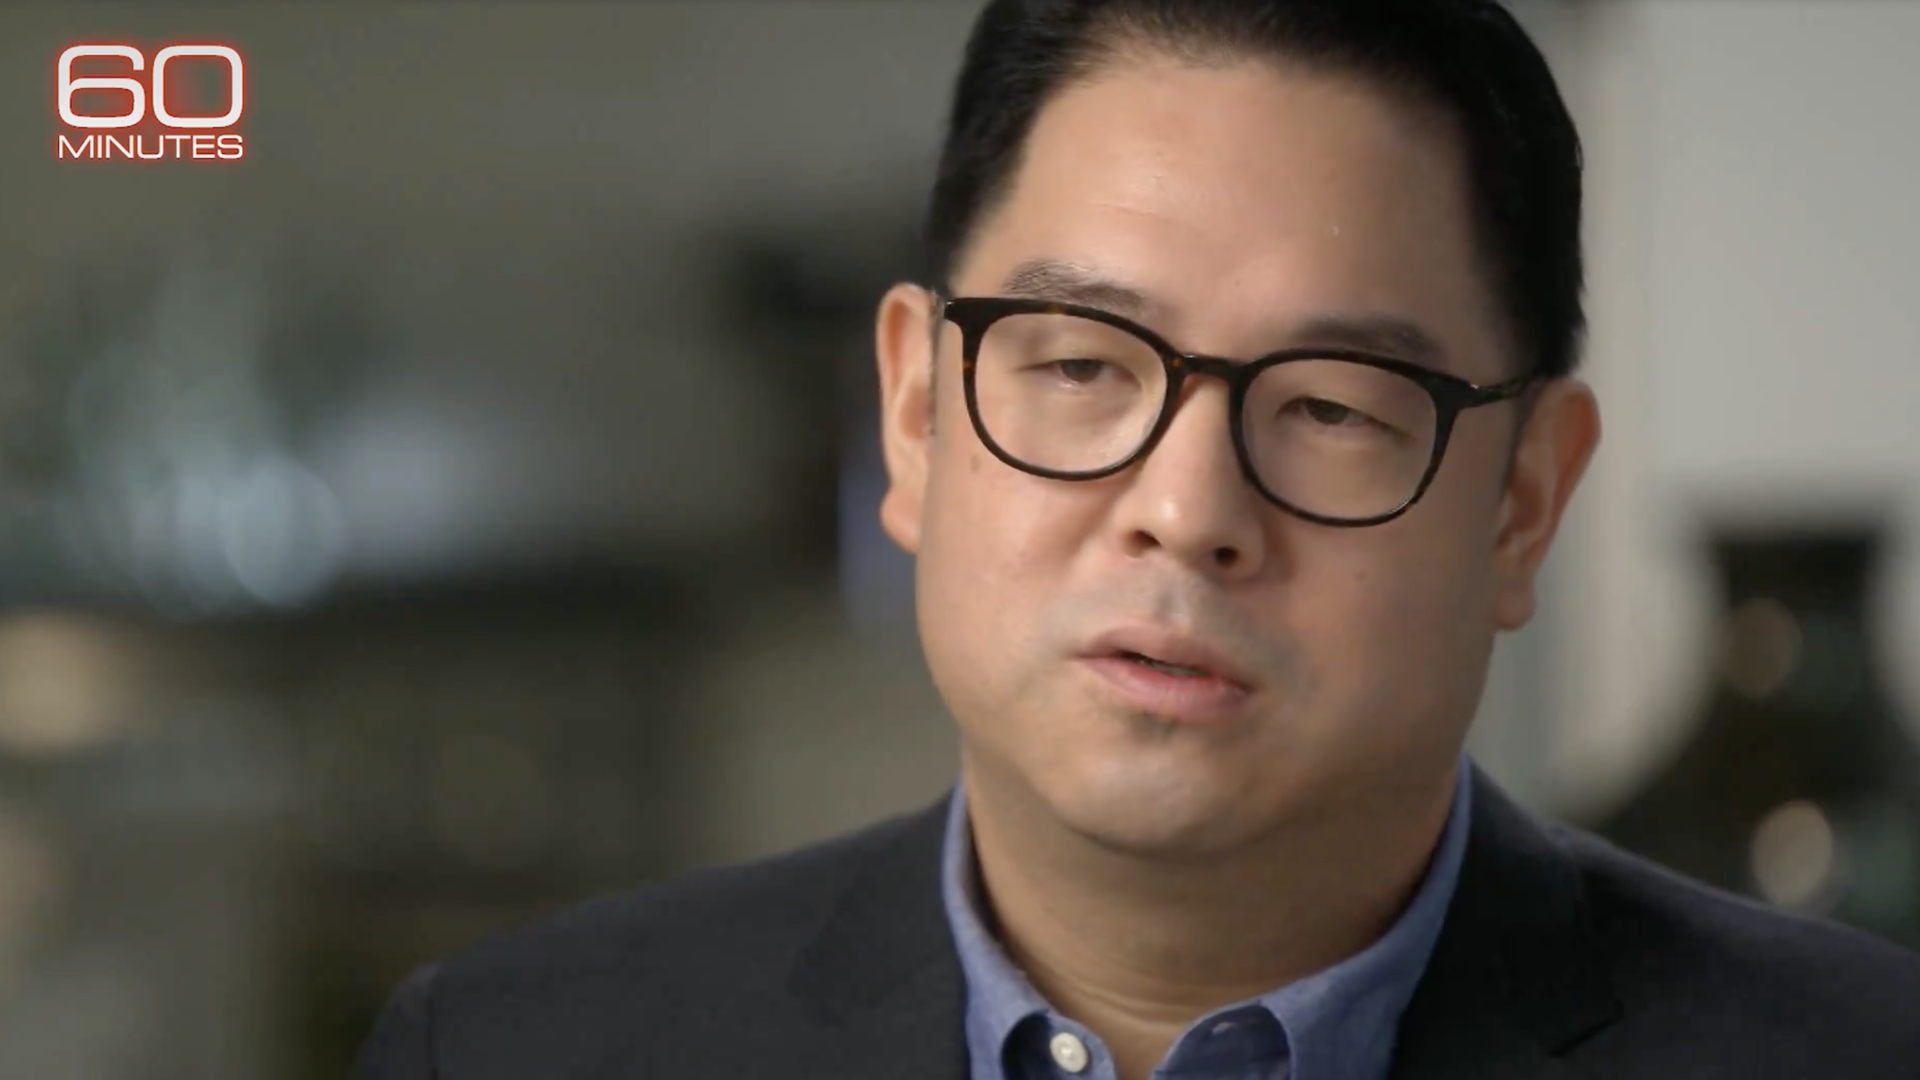 Christopher Ahn during his "60 Minutes" interview that aired Sunday.